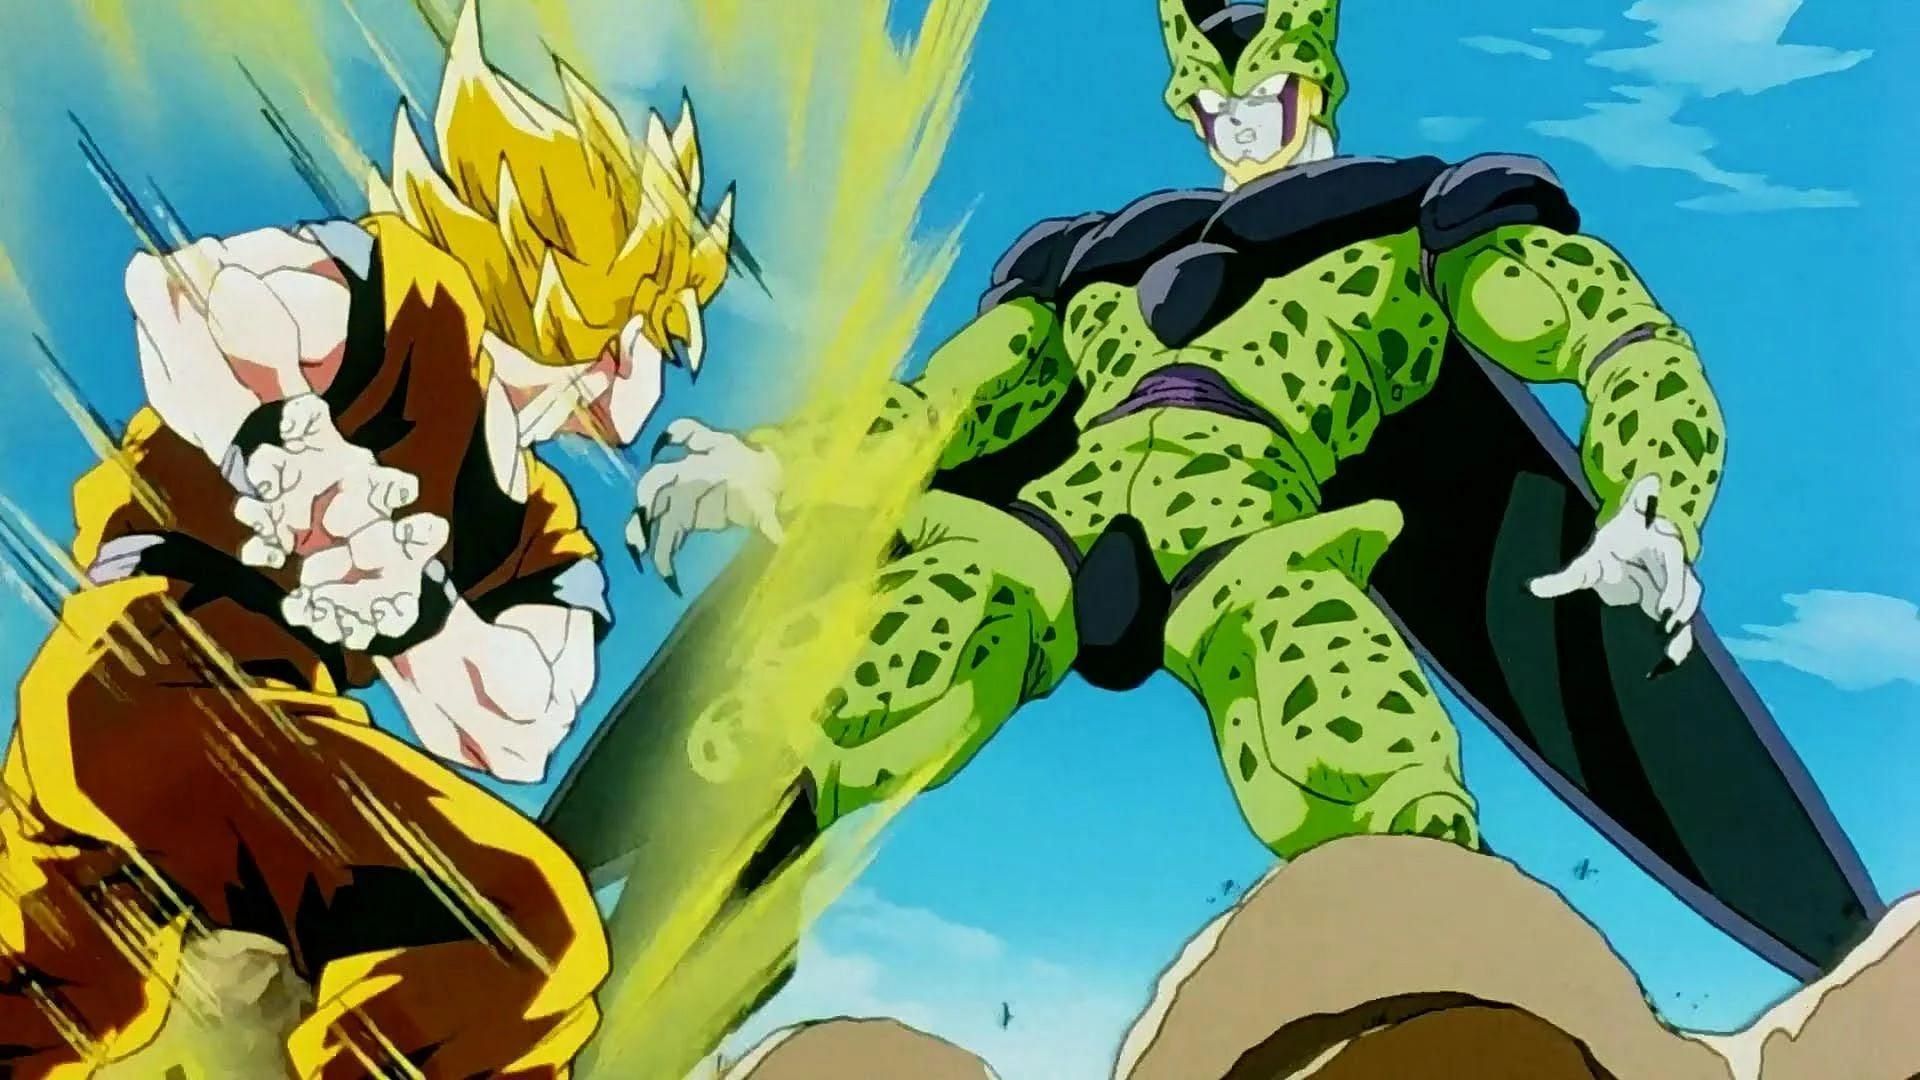 Goku faces off against Cell (Image via Toei Animation)